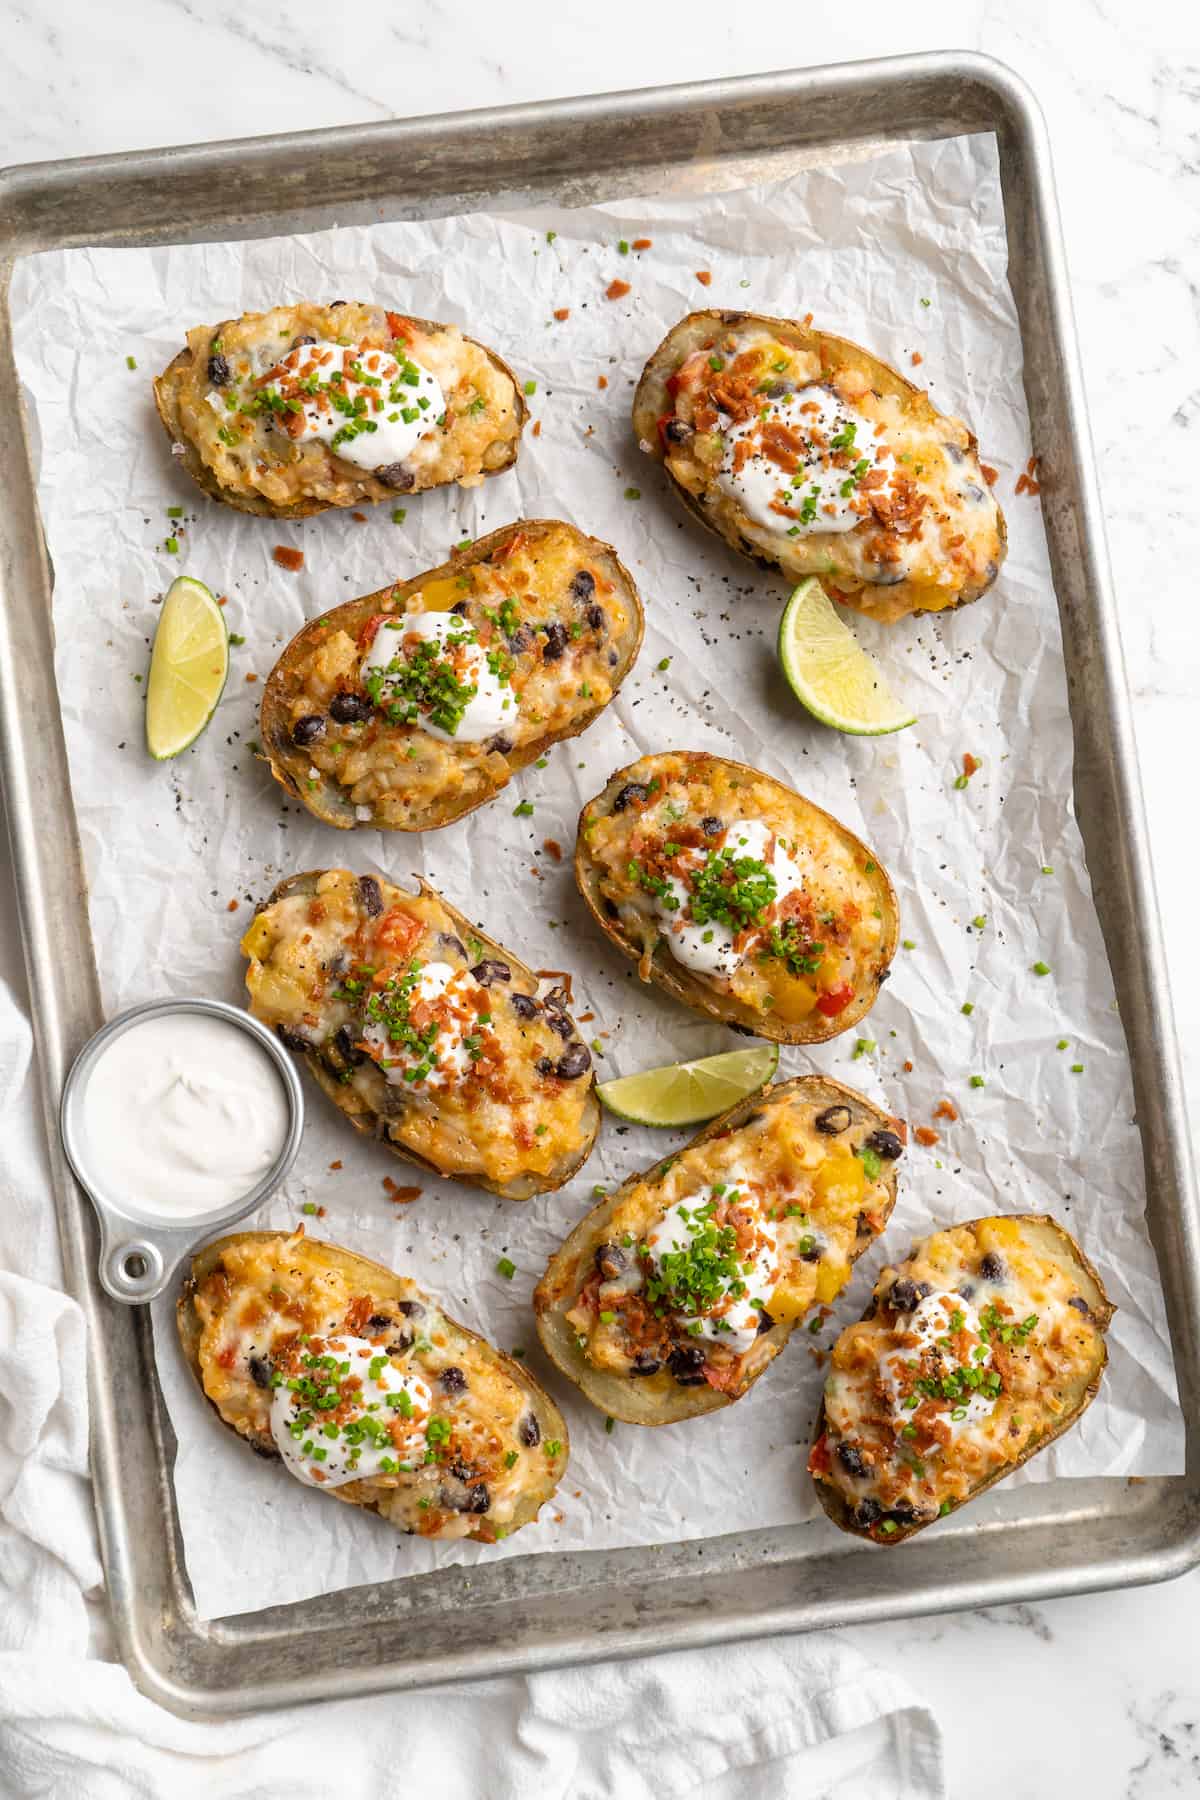 Overhead view of loaded potato skins arranged on parchment-lined baking sheet